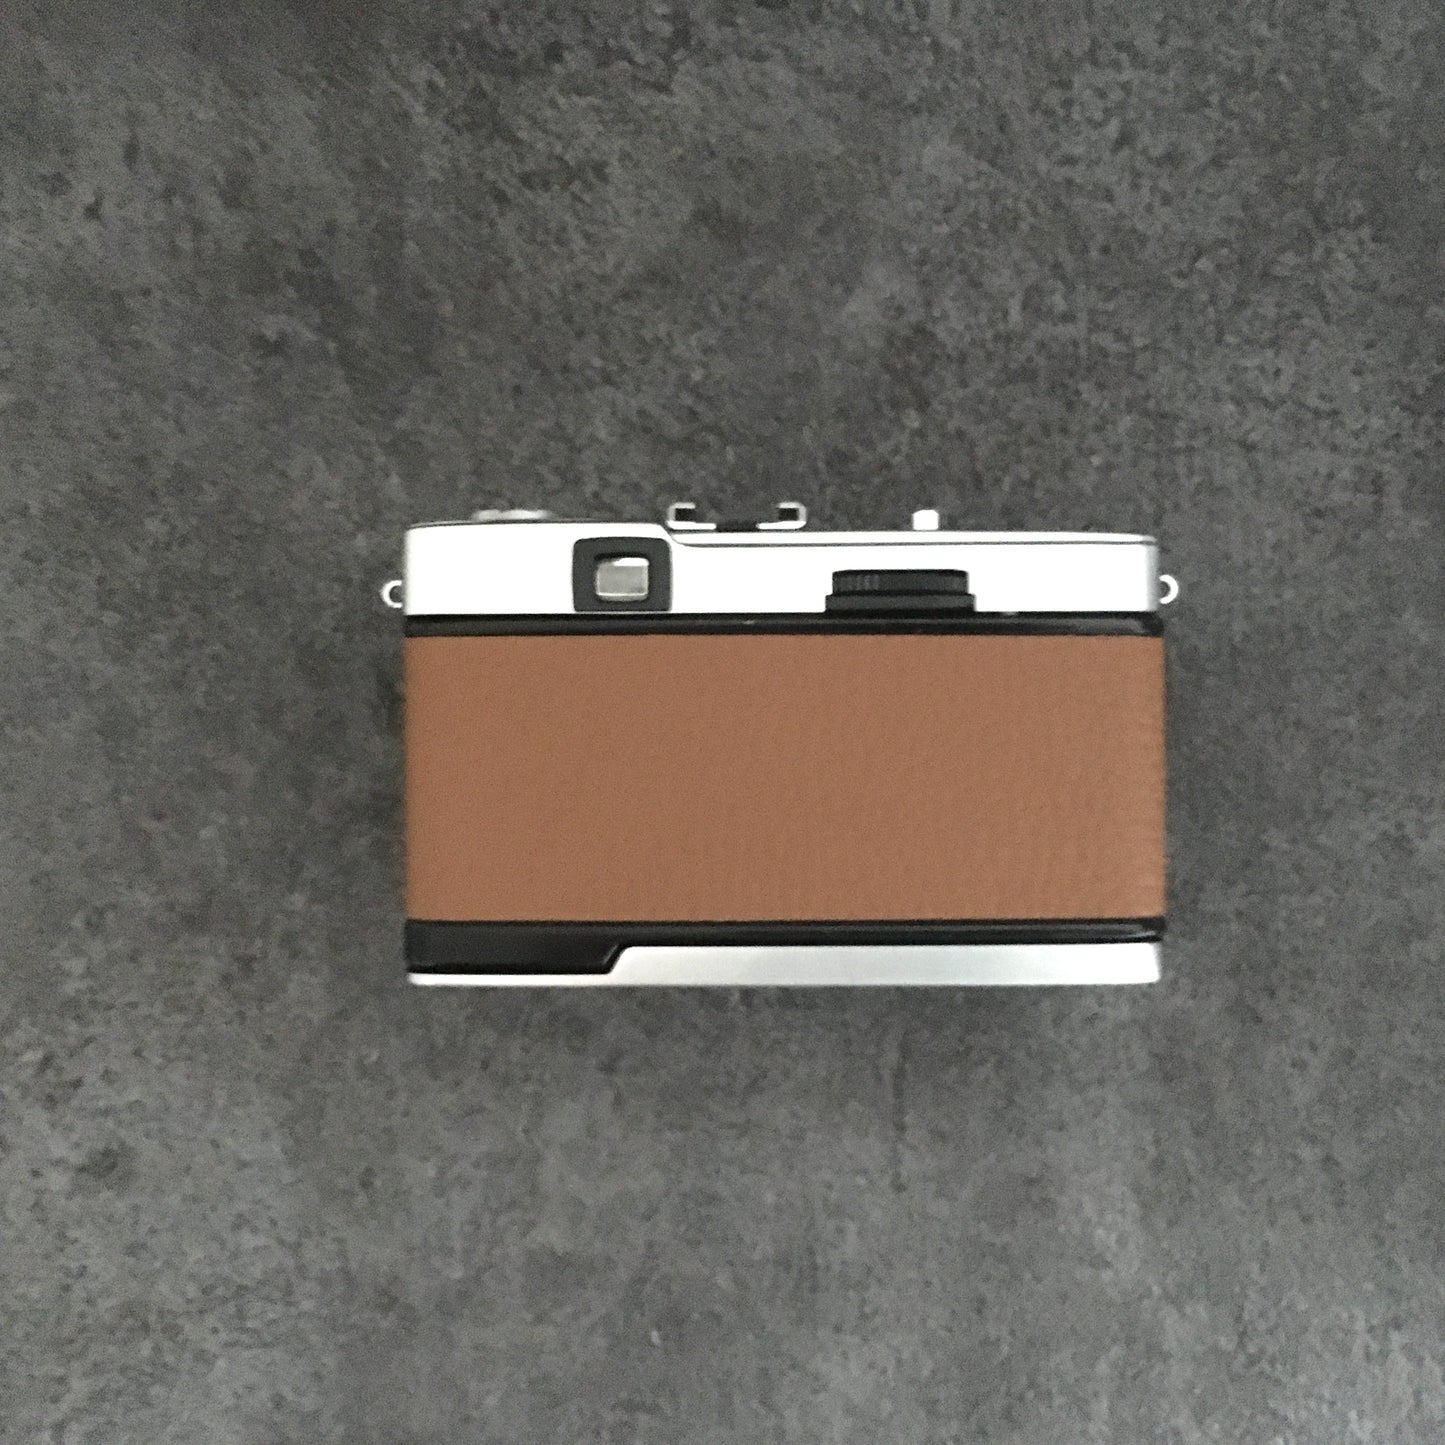 Olympus TRIP35  with cinnamon brown leather